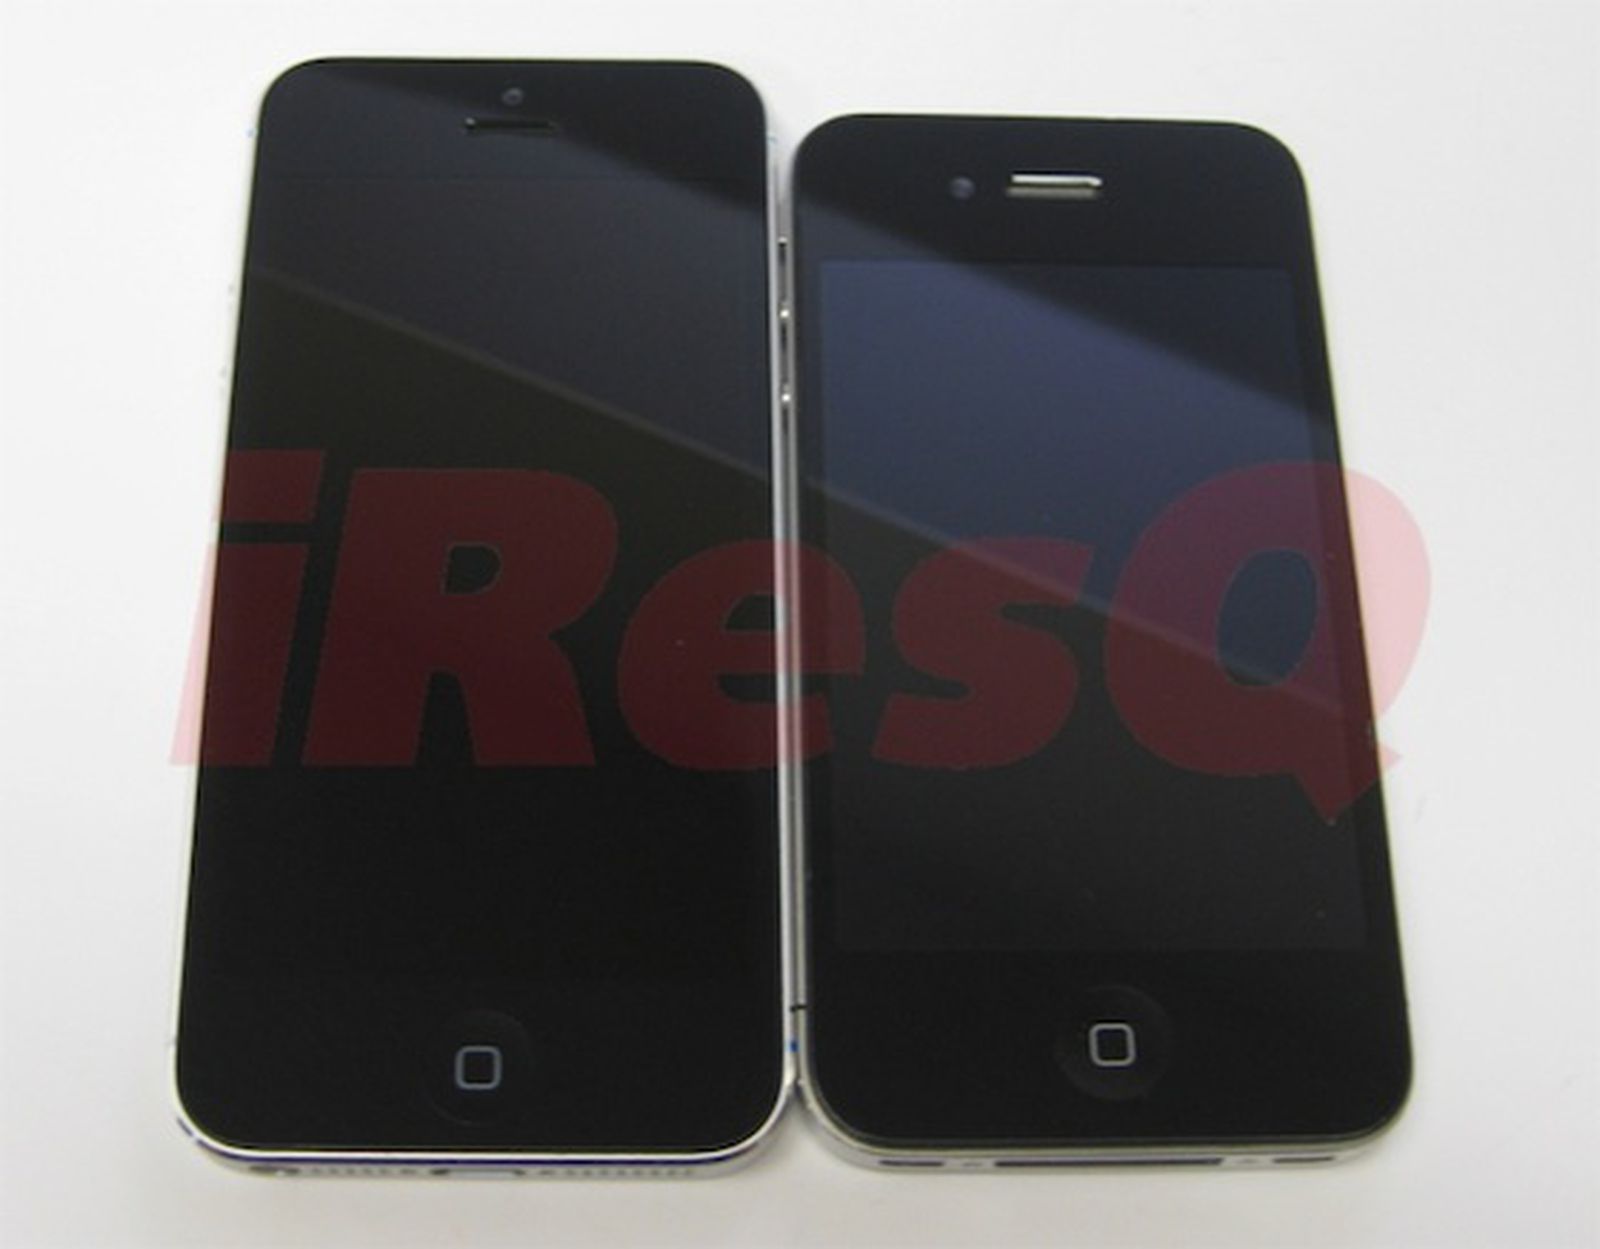 Differences Between iPhone 4, iPhone 4S and iPhone 5: EveryiPhone.com